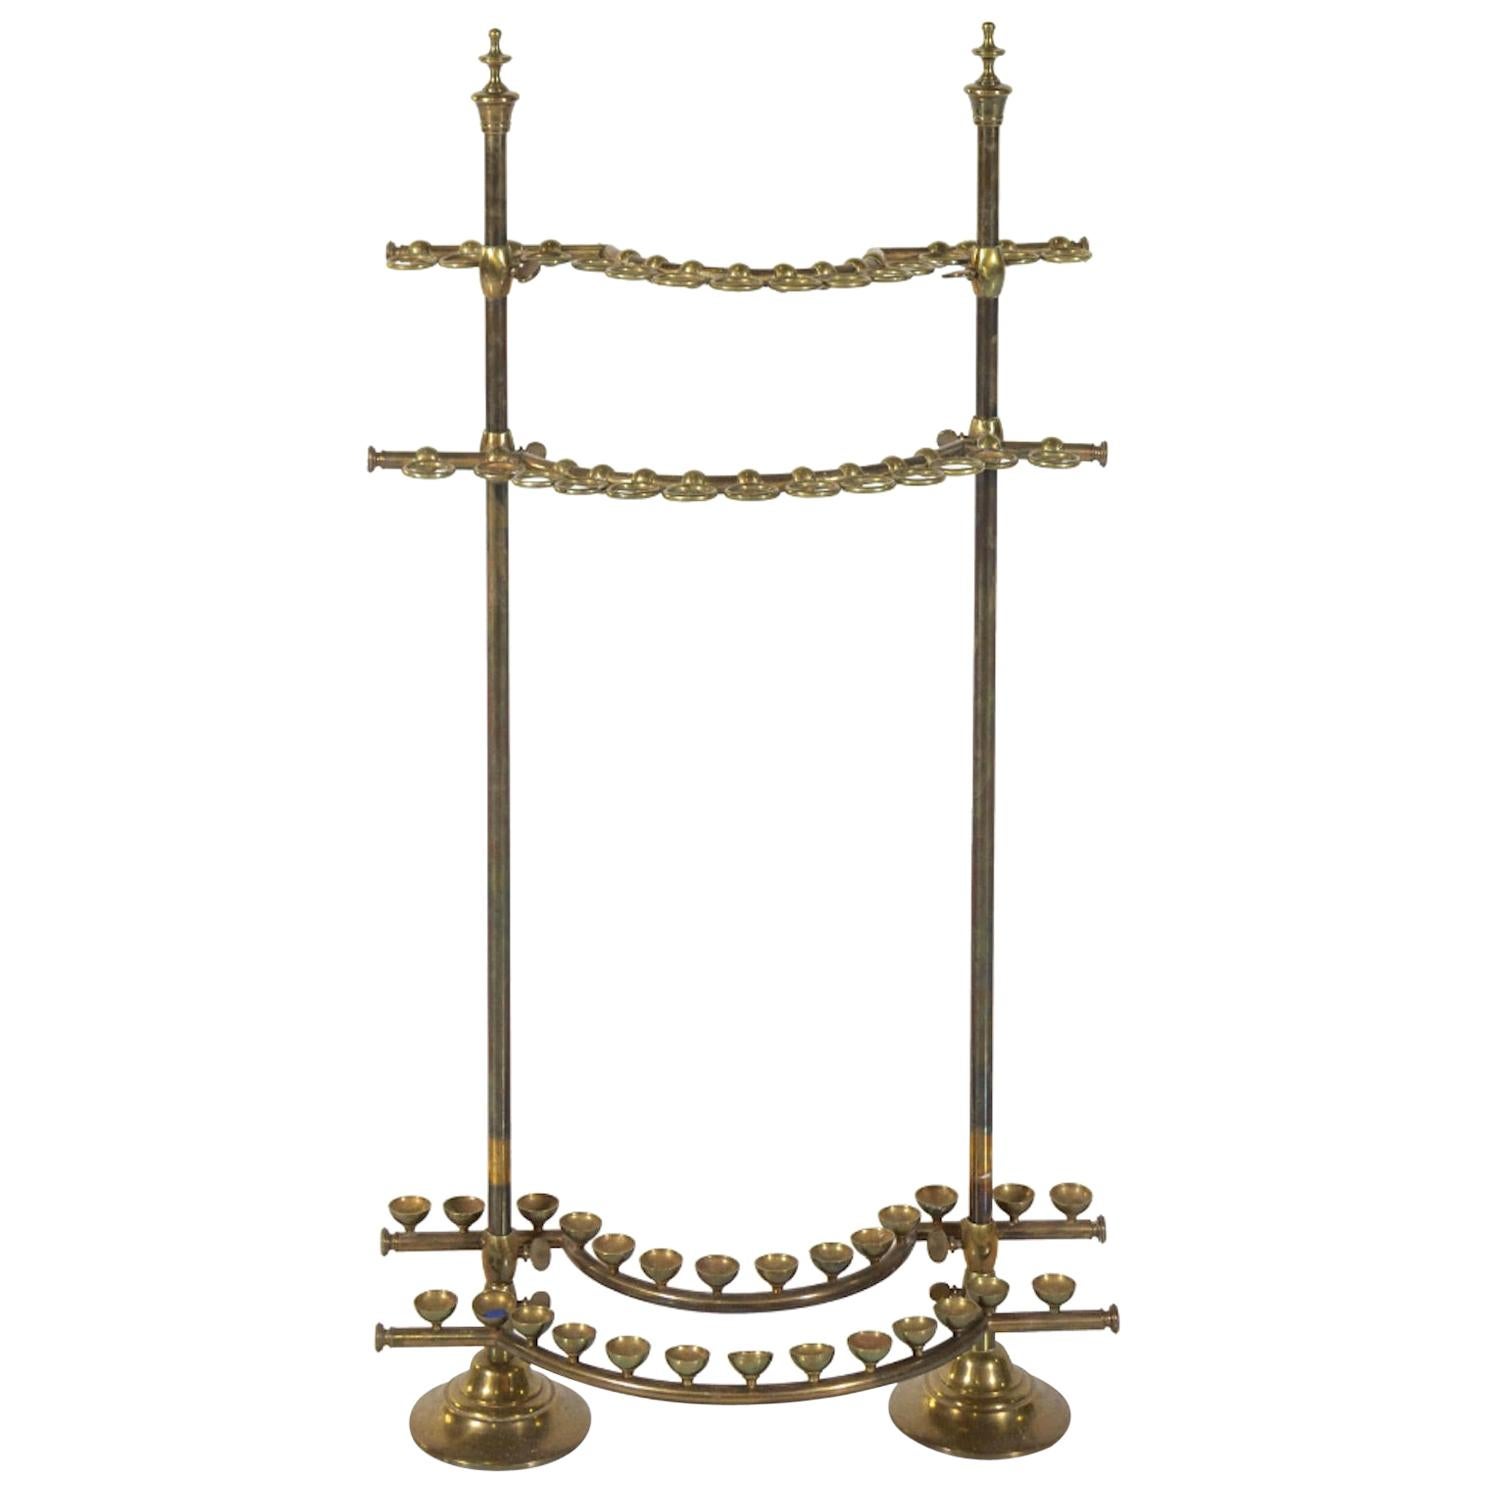 Rare English Brass Cane Stand 19th Century, Shown with the Colletion of Canes For Sale